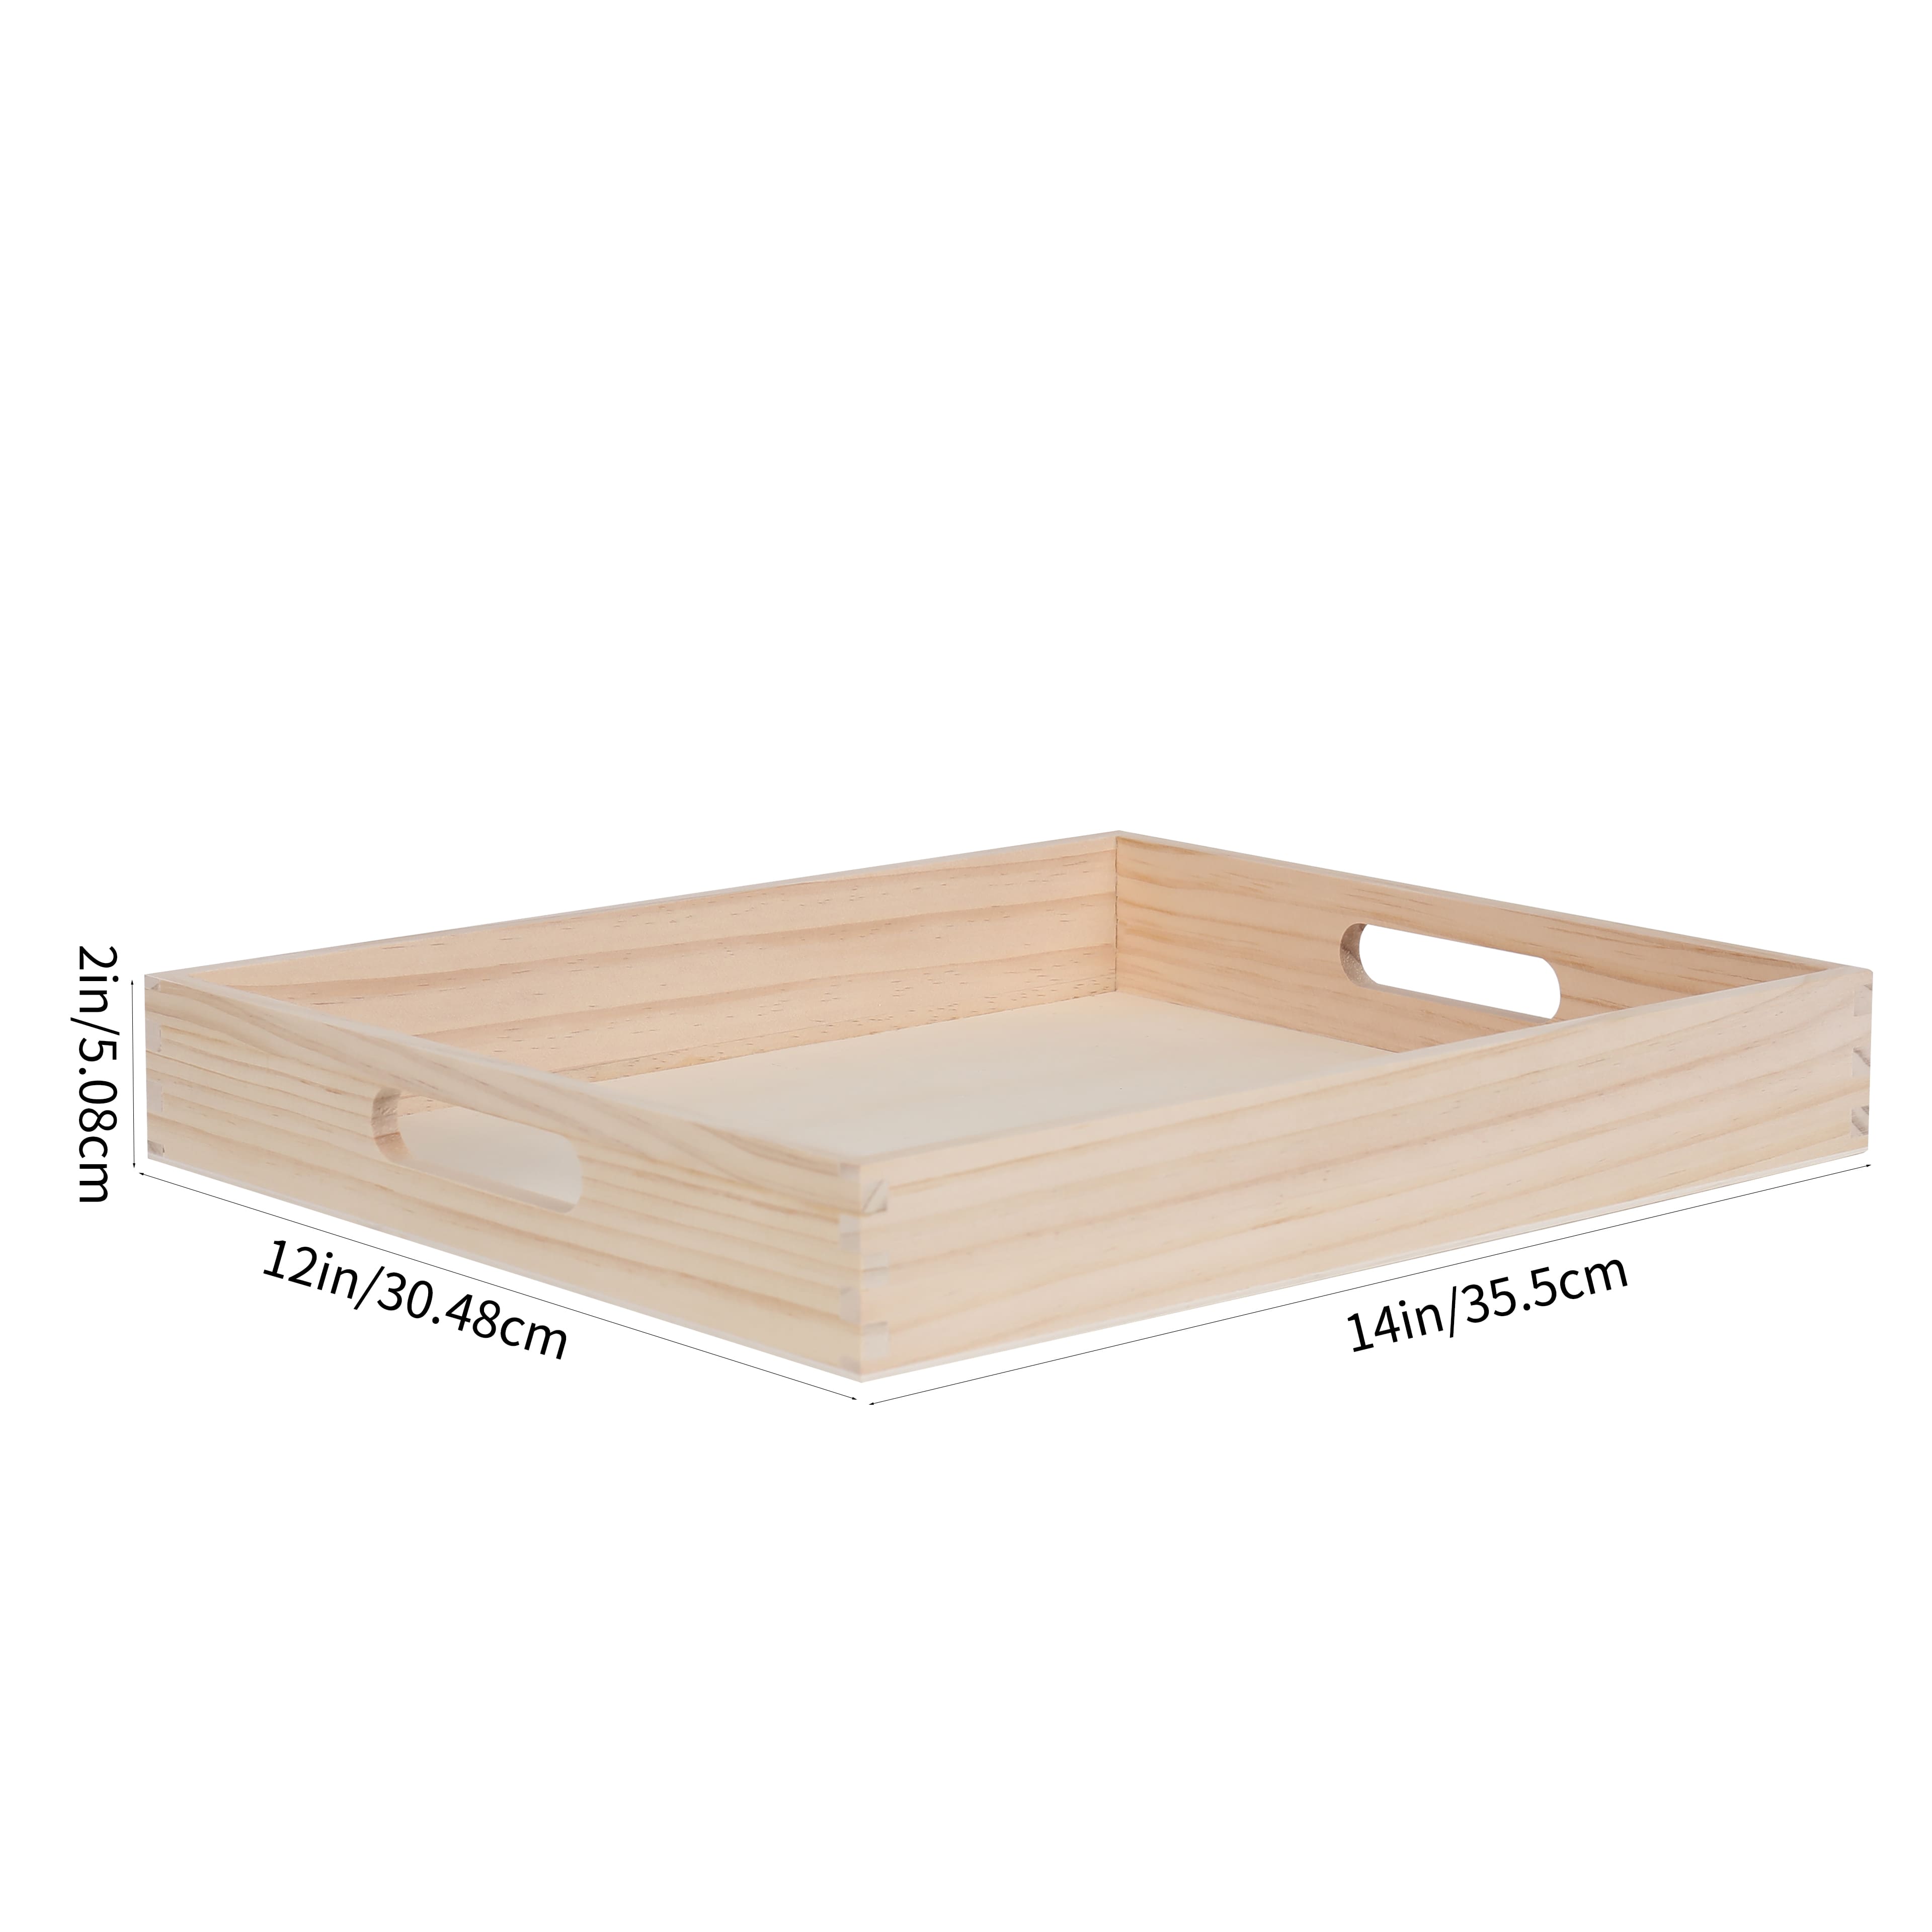 13 Wooden Tray by Make Market in Brown | 13.38 x 10.24 x 2.56 | Michaels